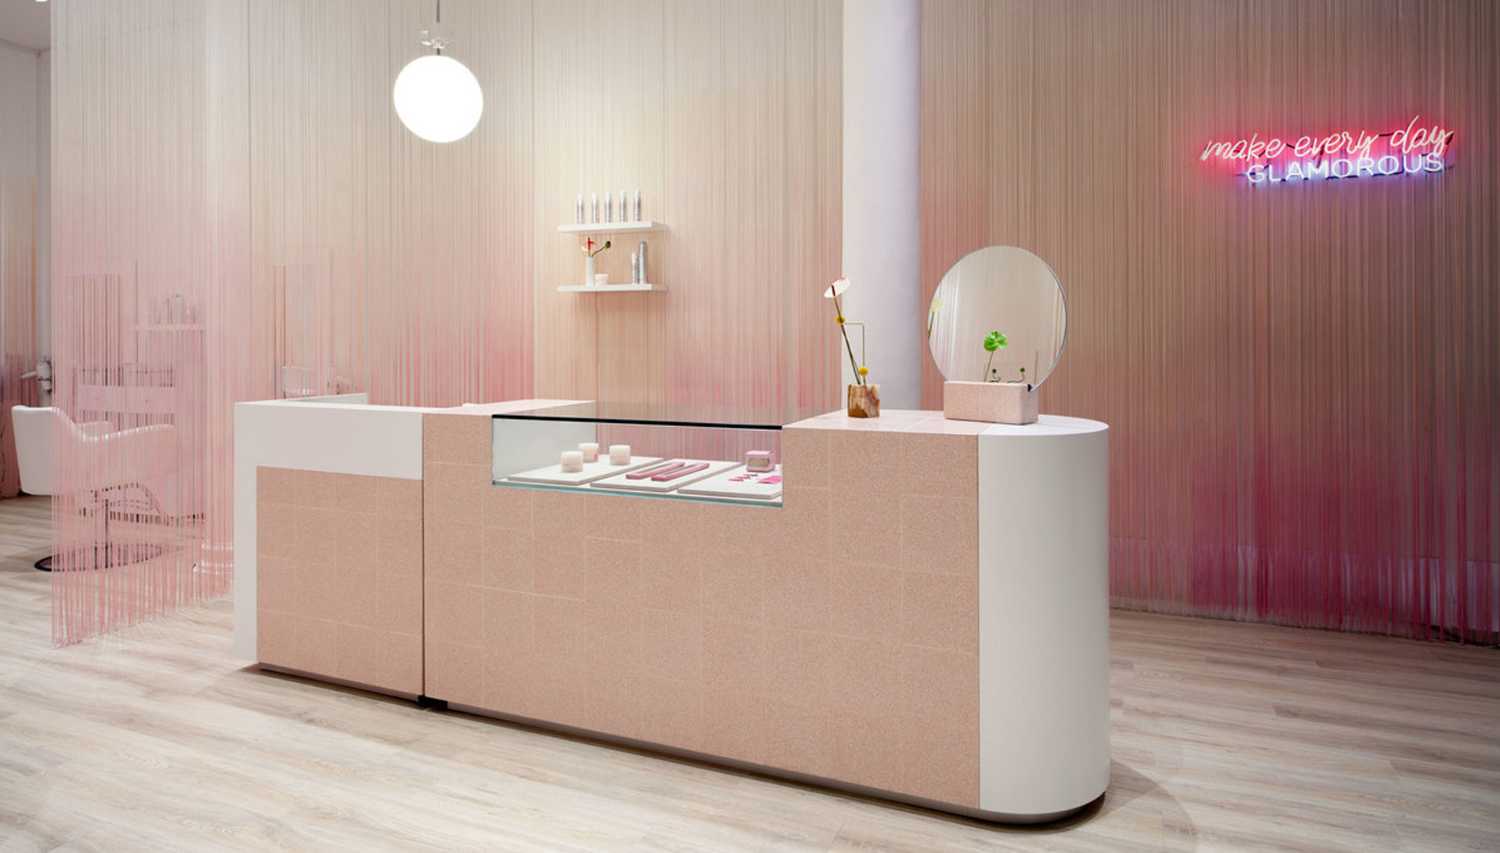 Glam Seamless: pink and white stylish store in Soho